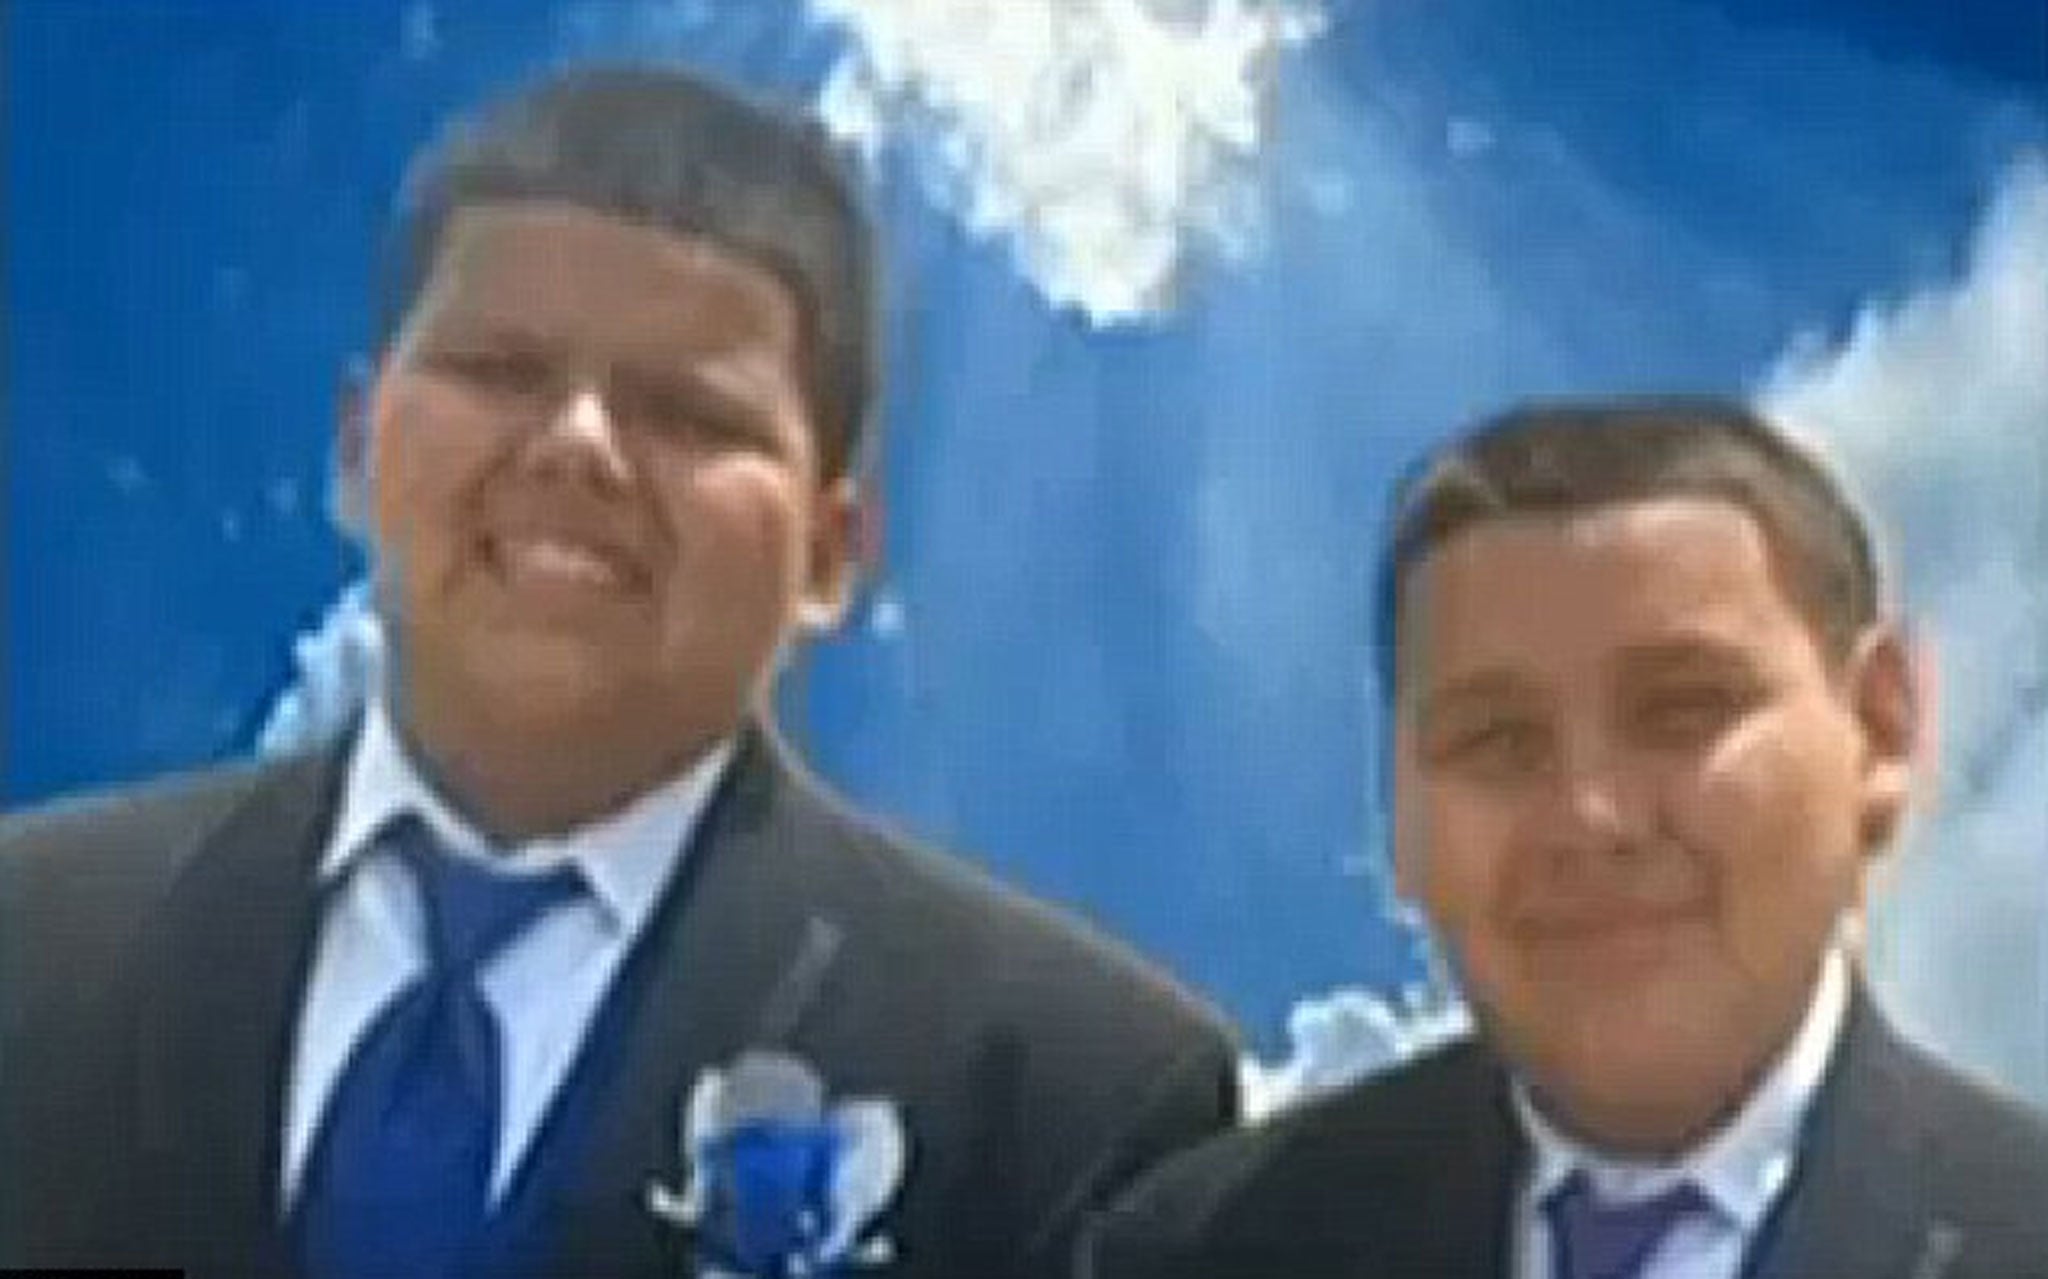 David Jr., 12, was killed instantly when Jose Banda ploughed his car in the Barajas’ broken down vehicle. Younger brother Caleb, 11, is said to have died at hospital later.